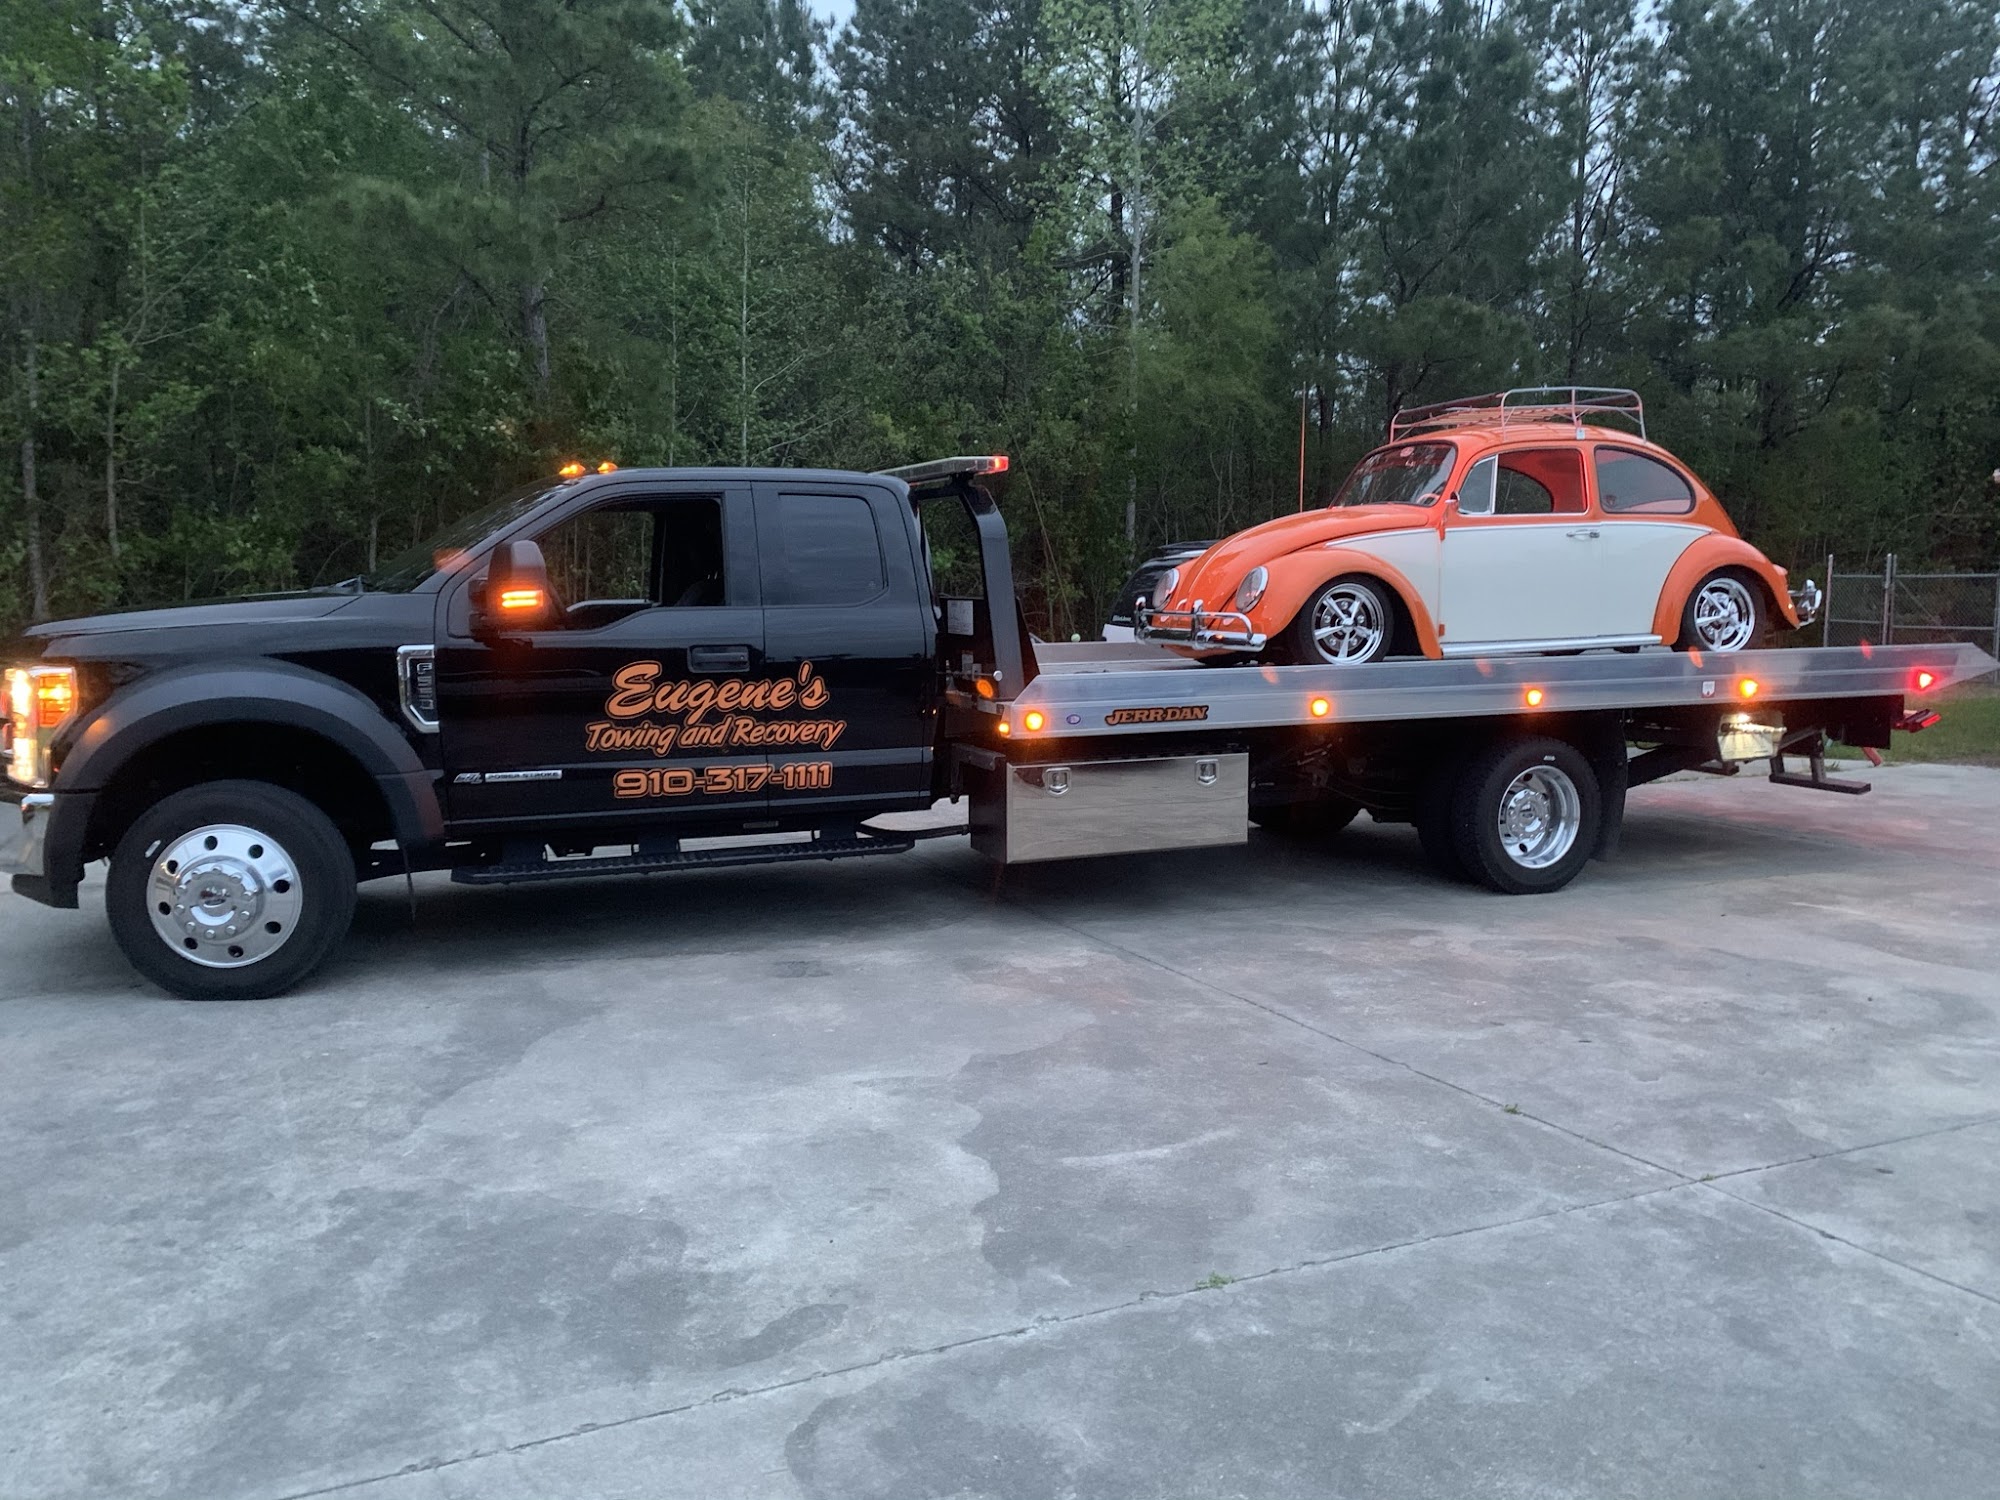 Eugene's Towing & Recovery